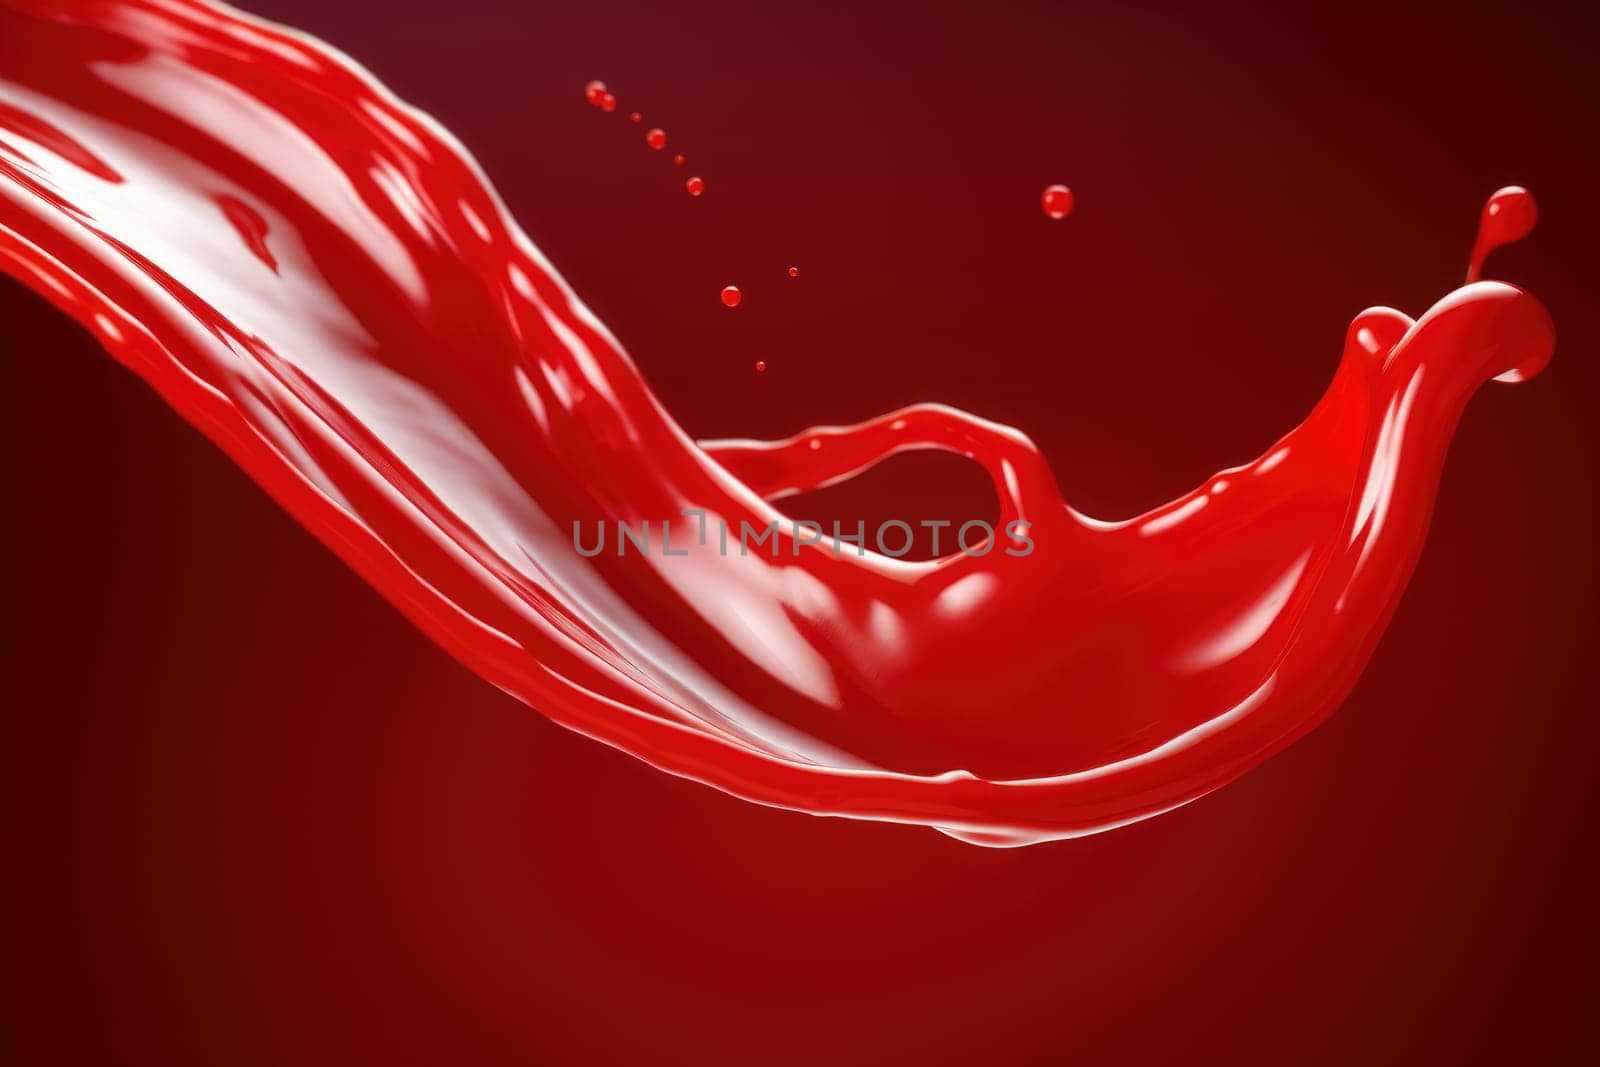 Red tomato ketchup or red liquid splash on red background. AI Generated